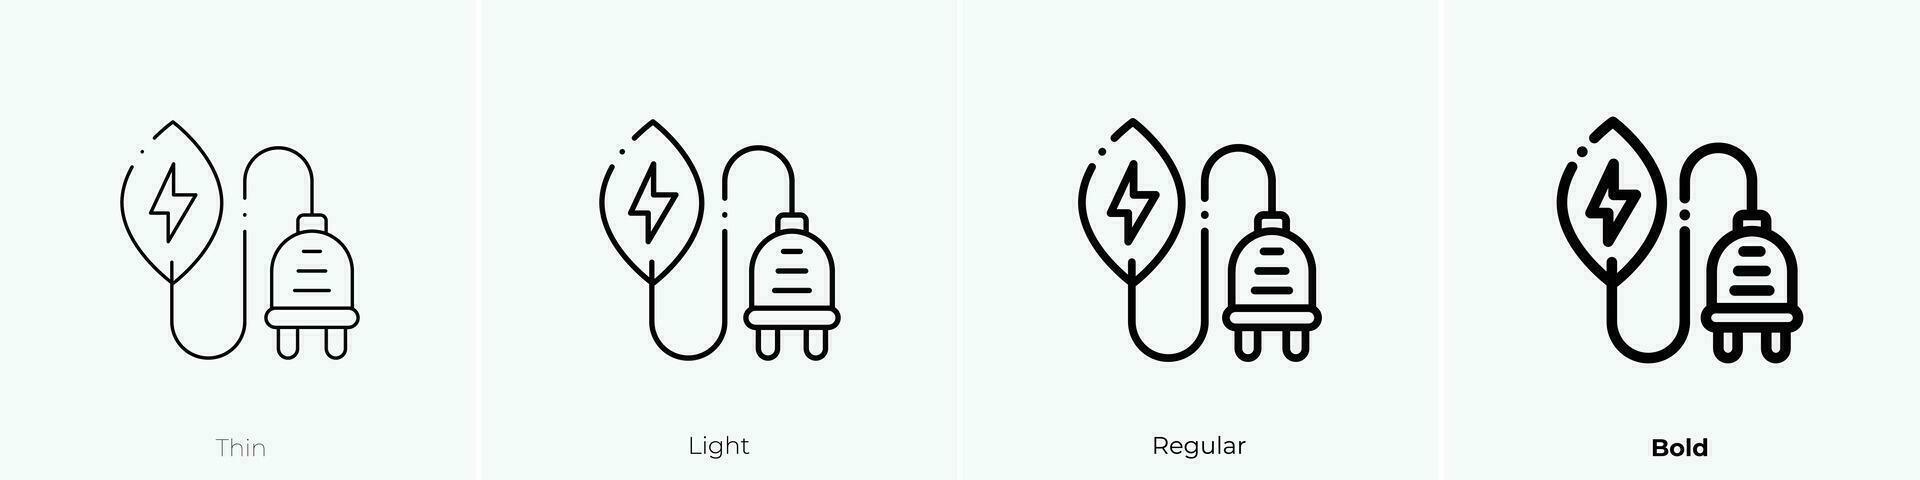 power icon. Thin, Light, Regular And Bold style design isolated on white background vector